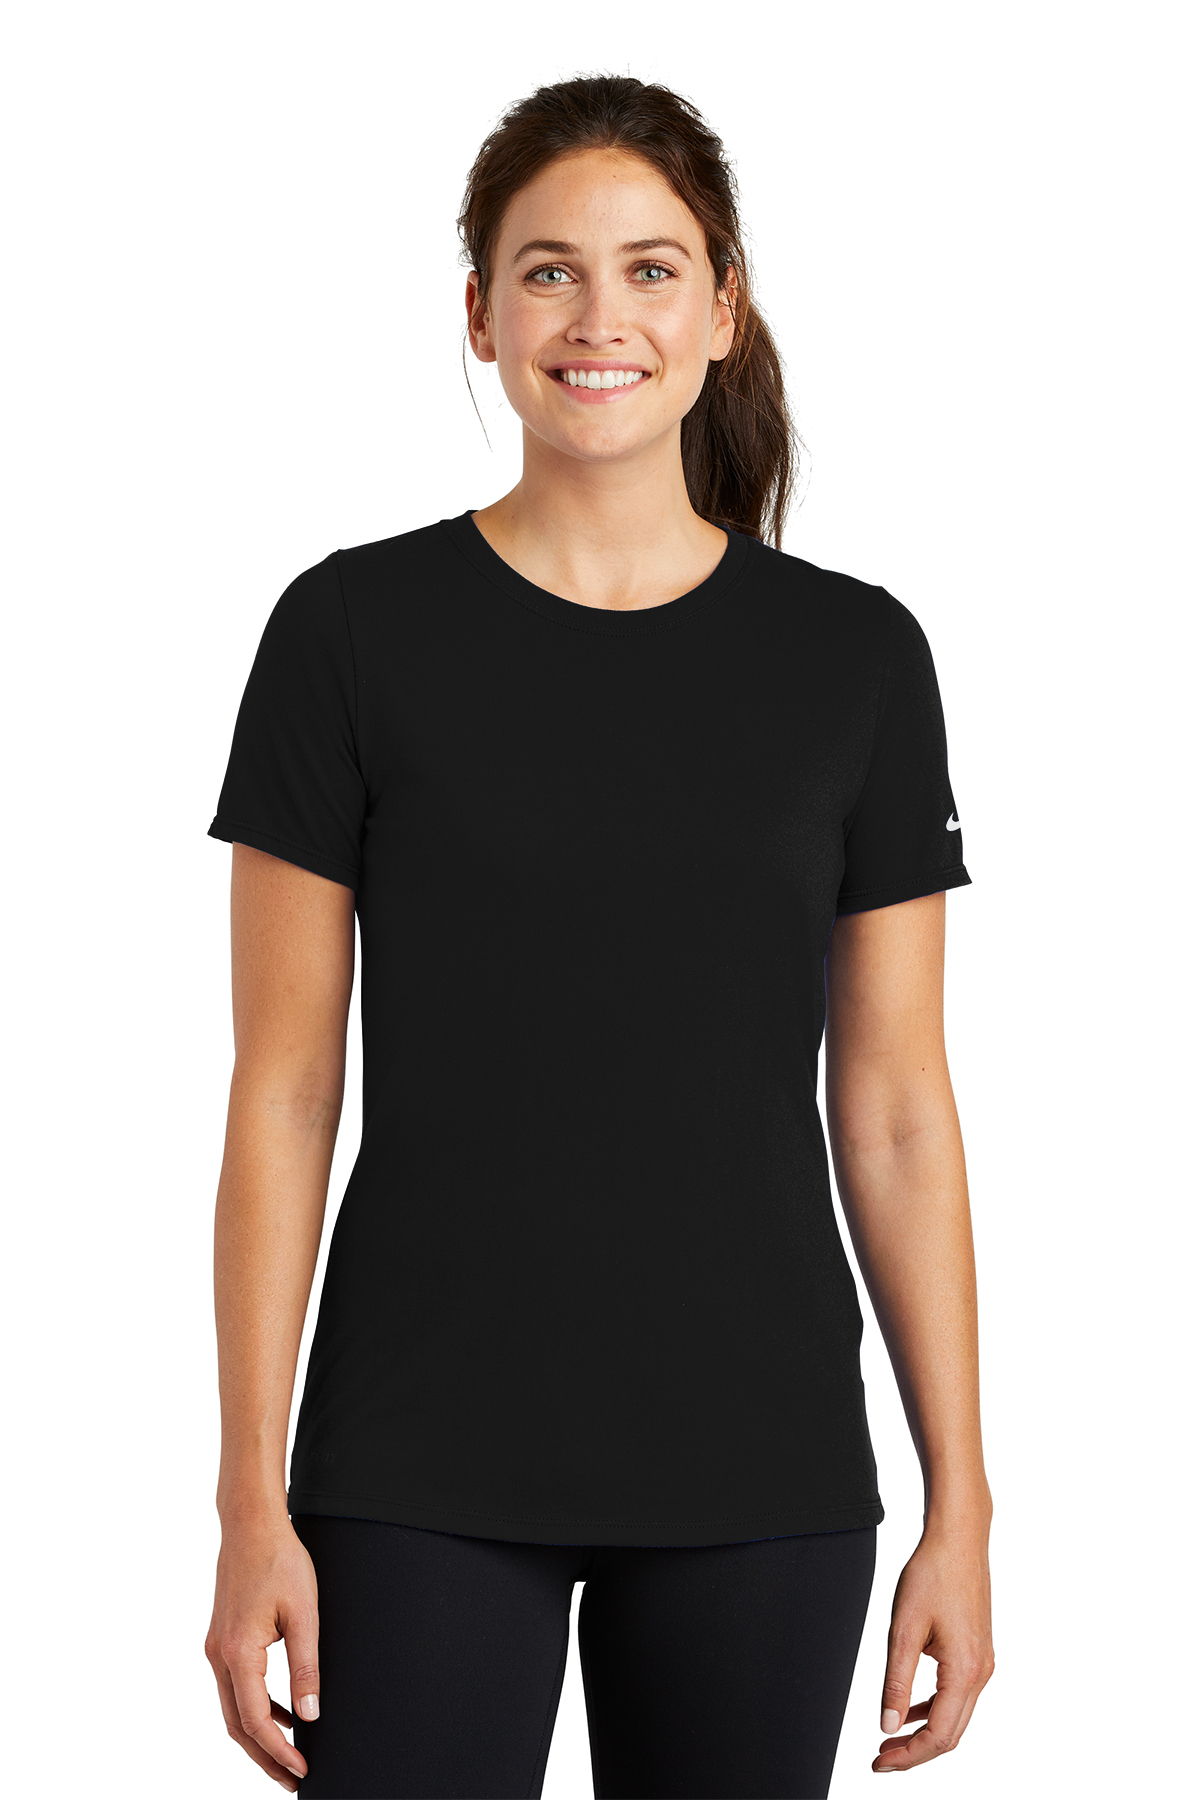 Nike Ladies Dri-FIT Cotton/Poly Scoop Neck Tee | Product | Company Casuals